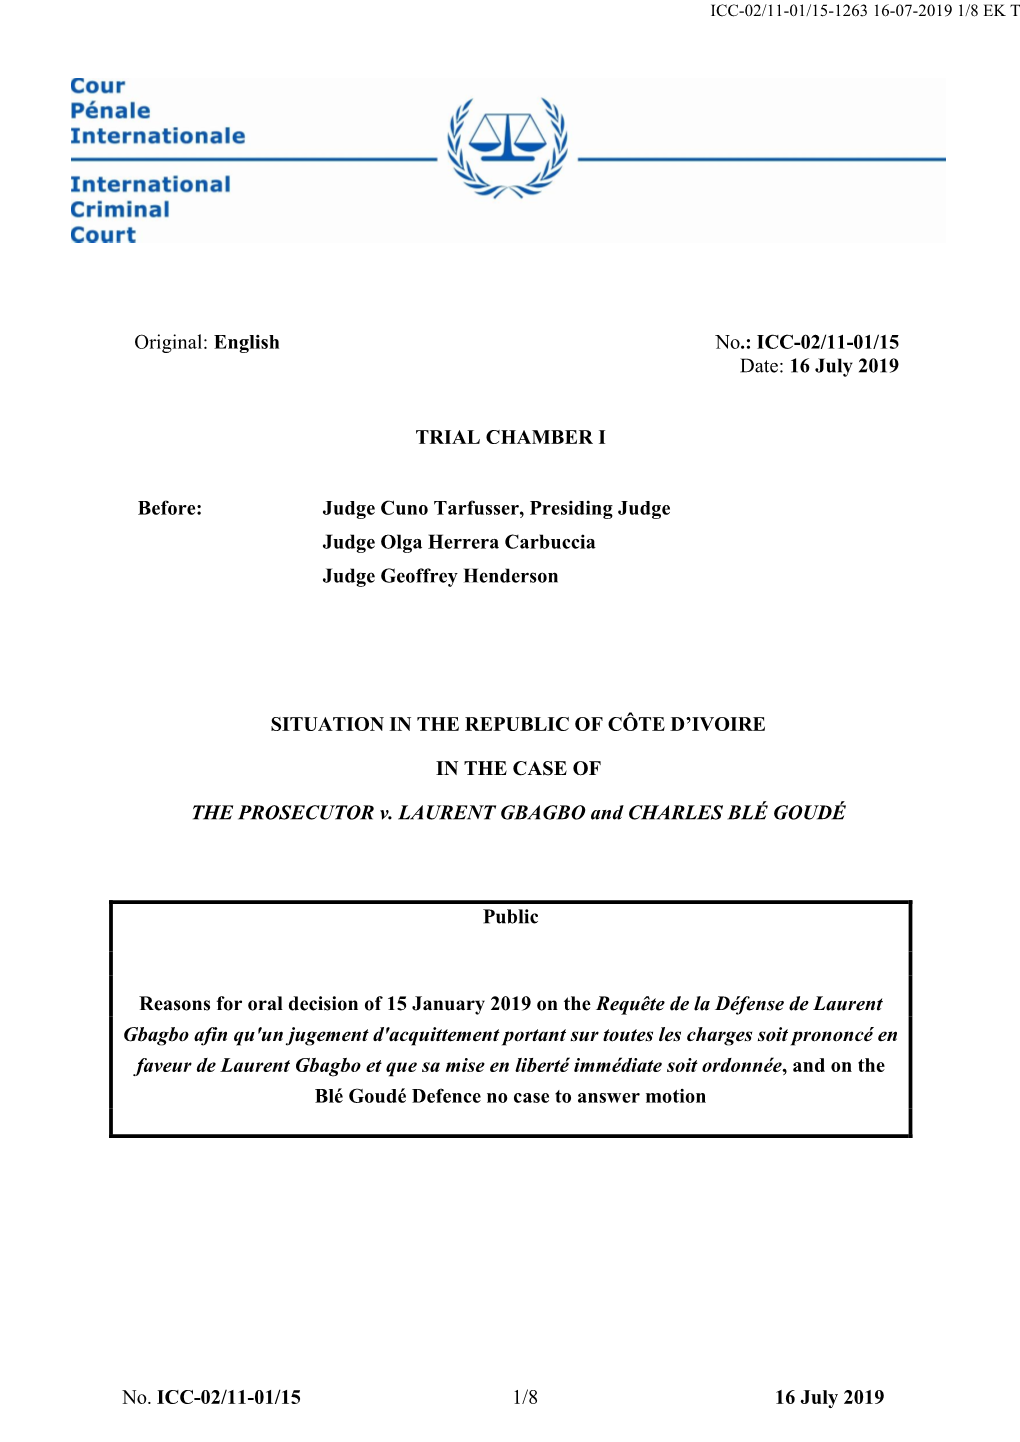 English No.: ICC-02/11-01/15 Date: 16 July 2019 TRIAL CHAMBER I Before